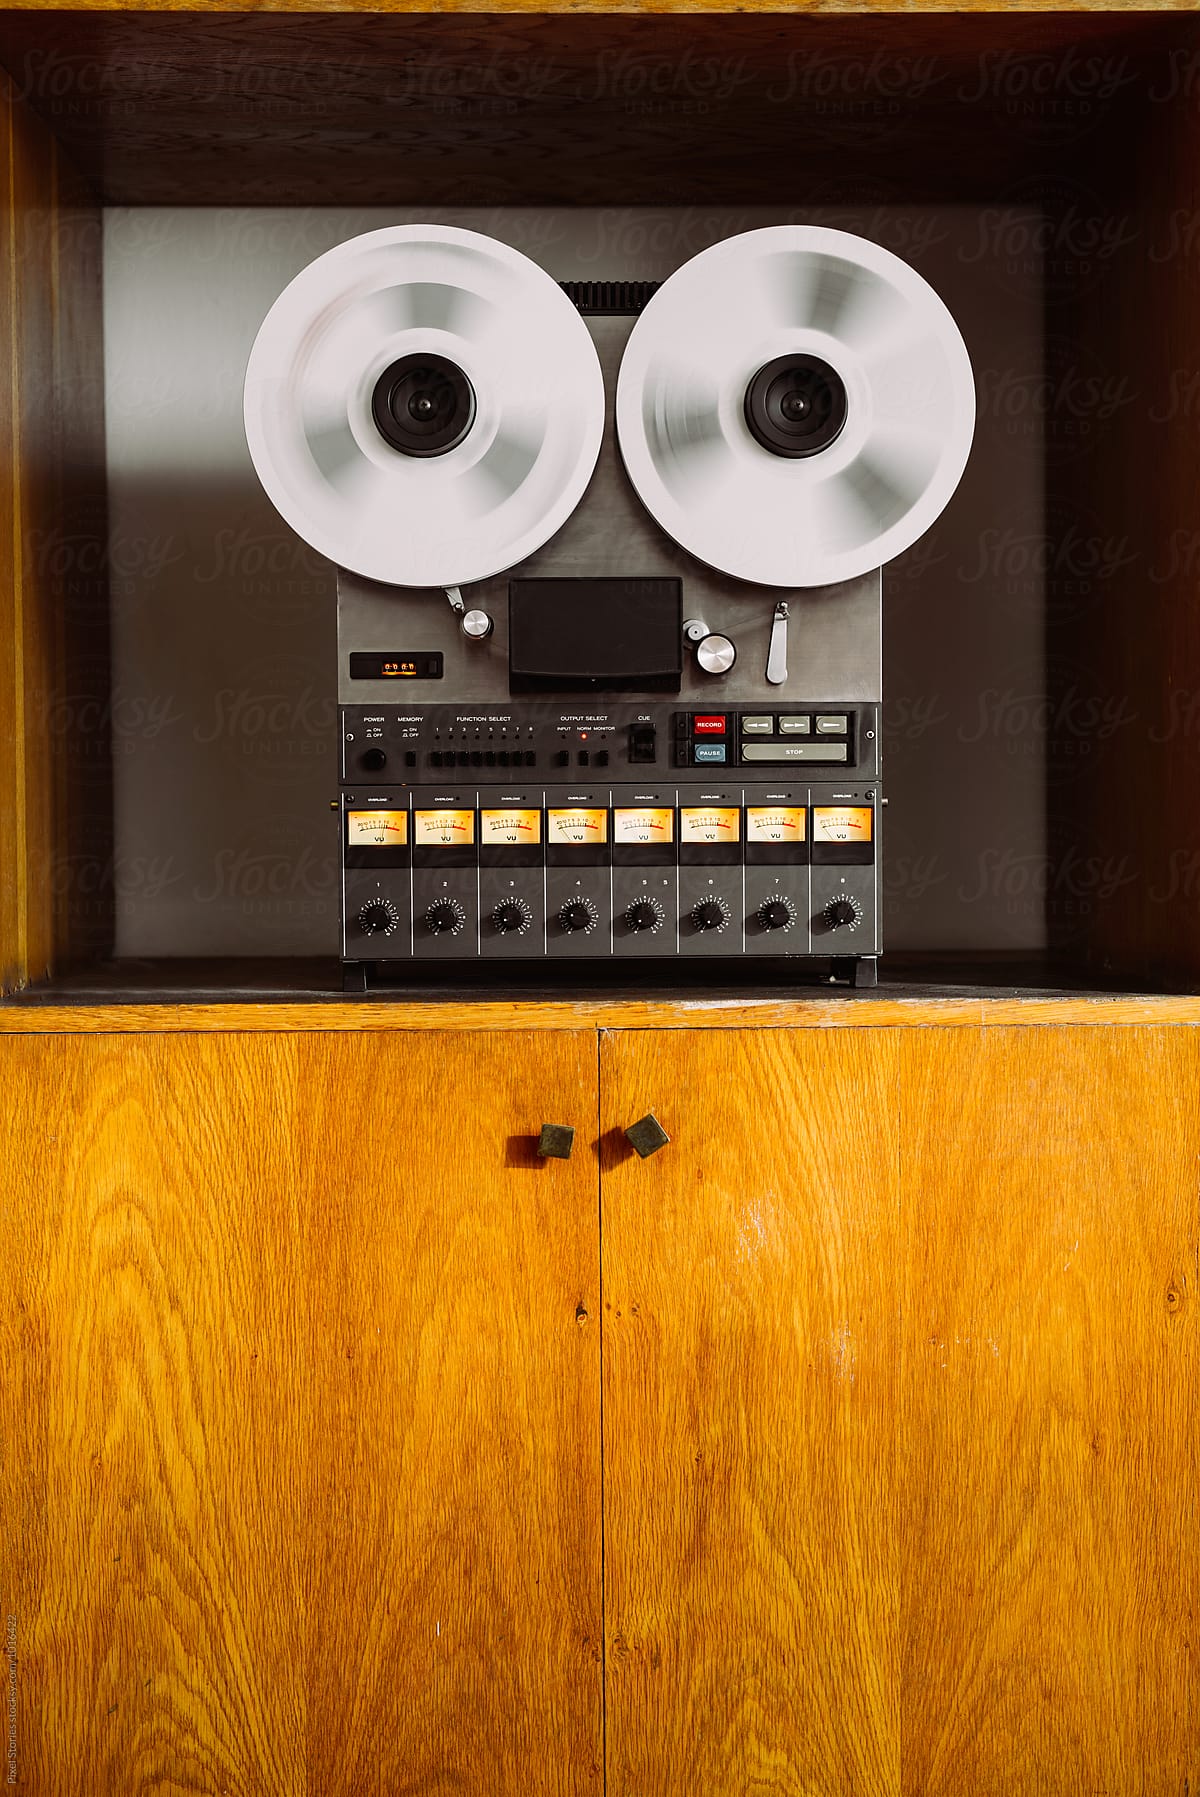 Vintage Reel-to-reel Tape Player/ Recorder by Stocksy Contributor